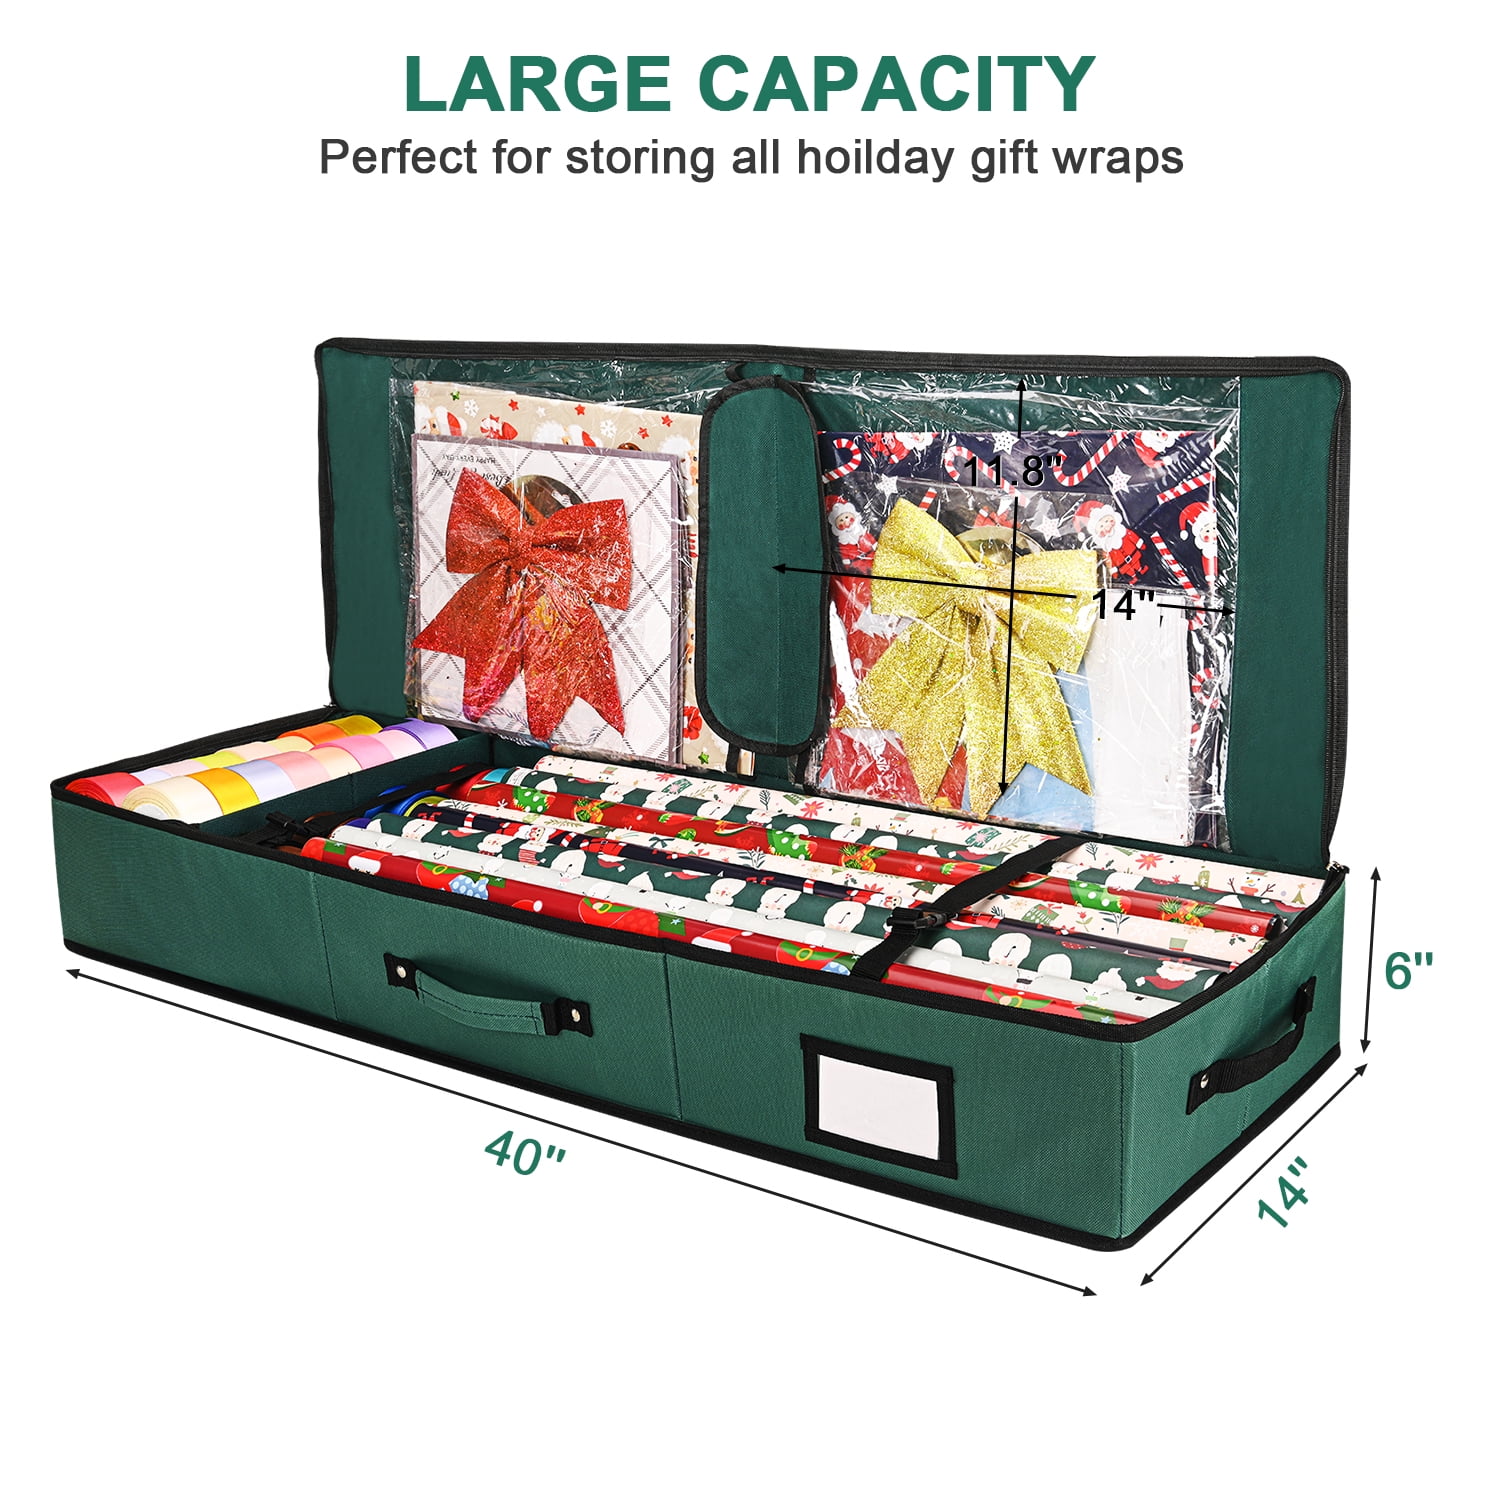 Timberlake Wrapping Paper Storage Organizer in Red and Green